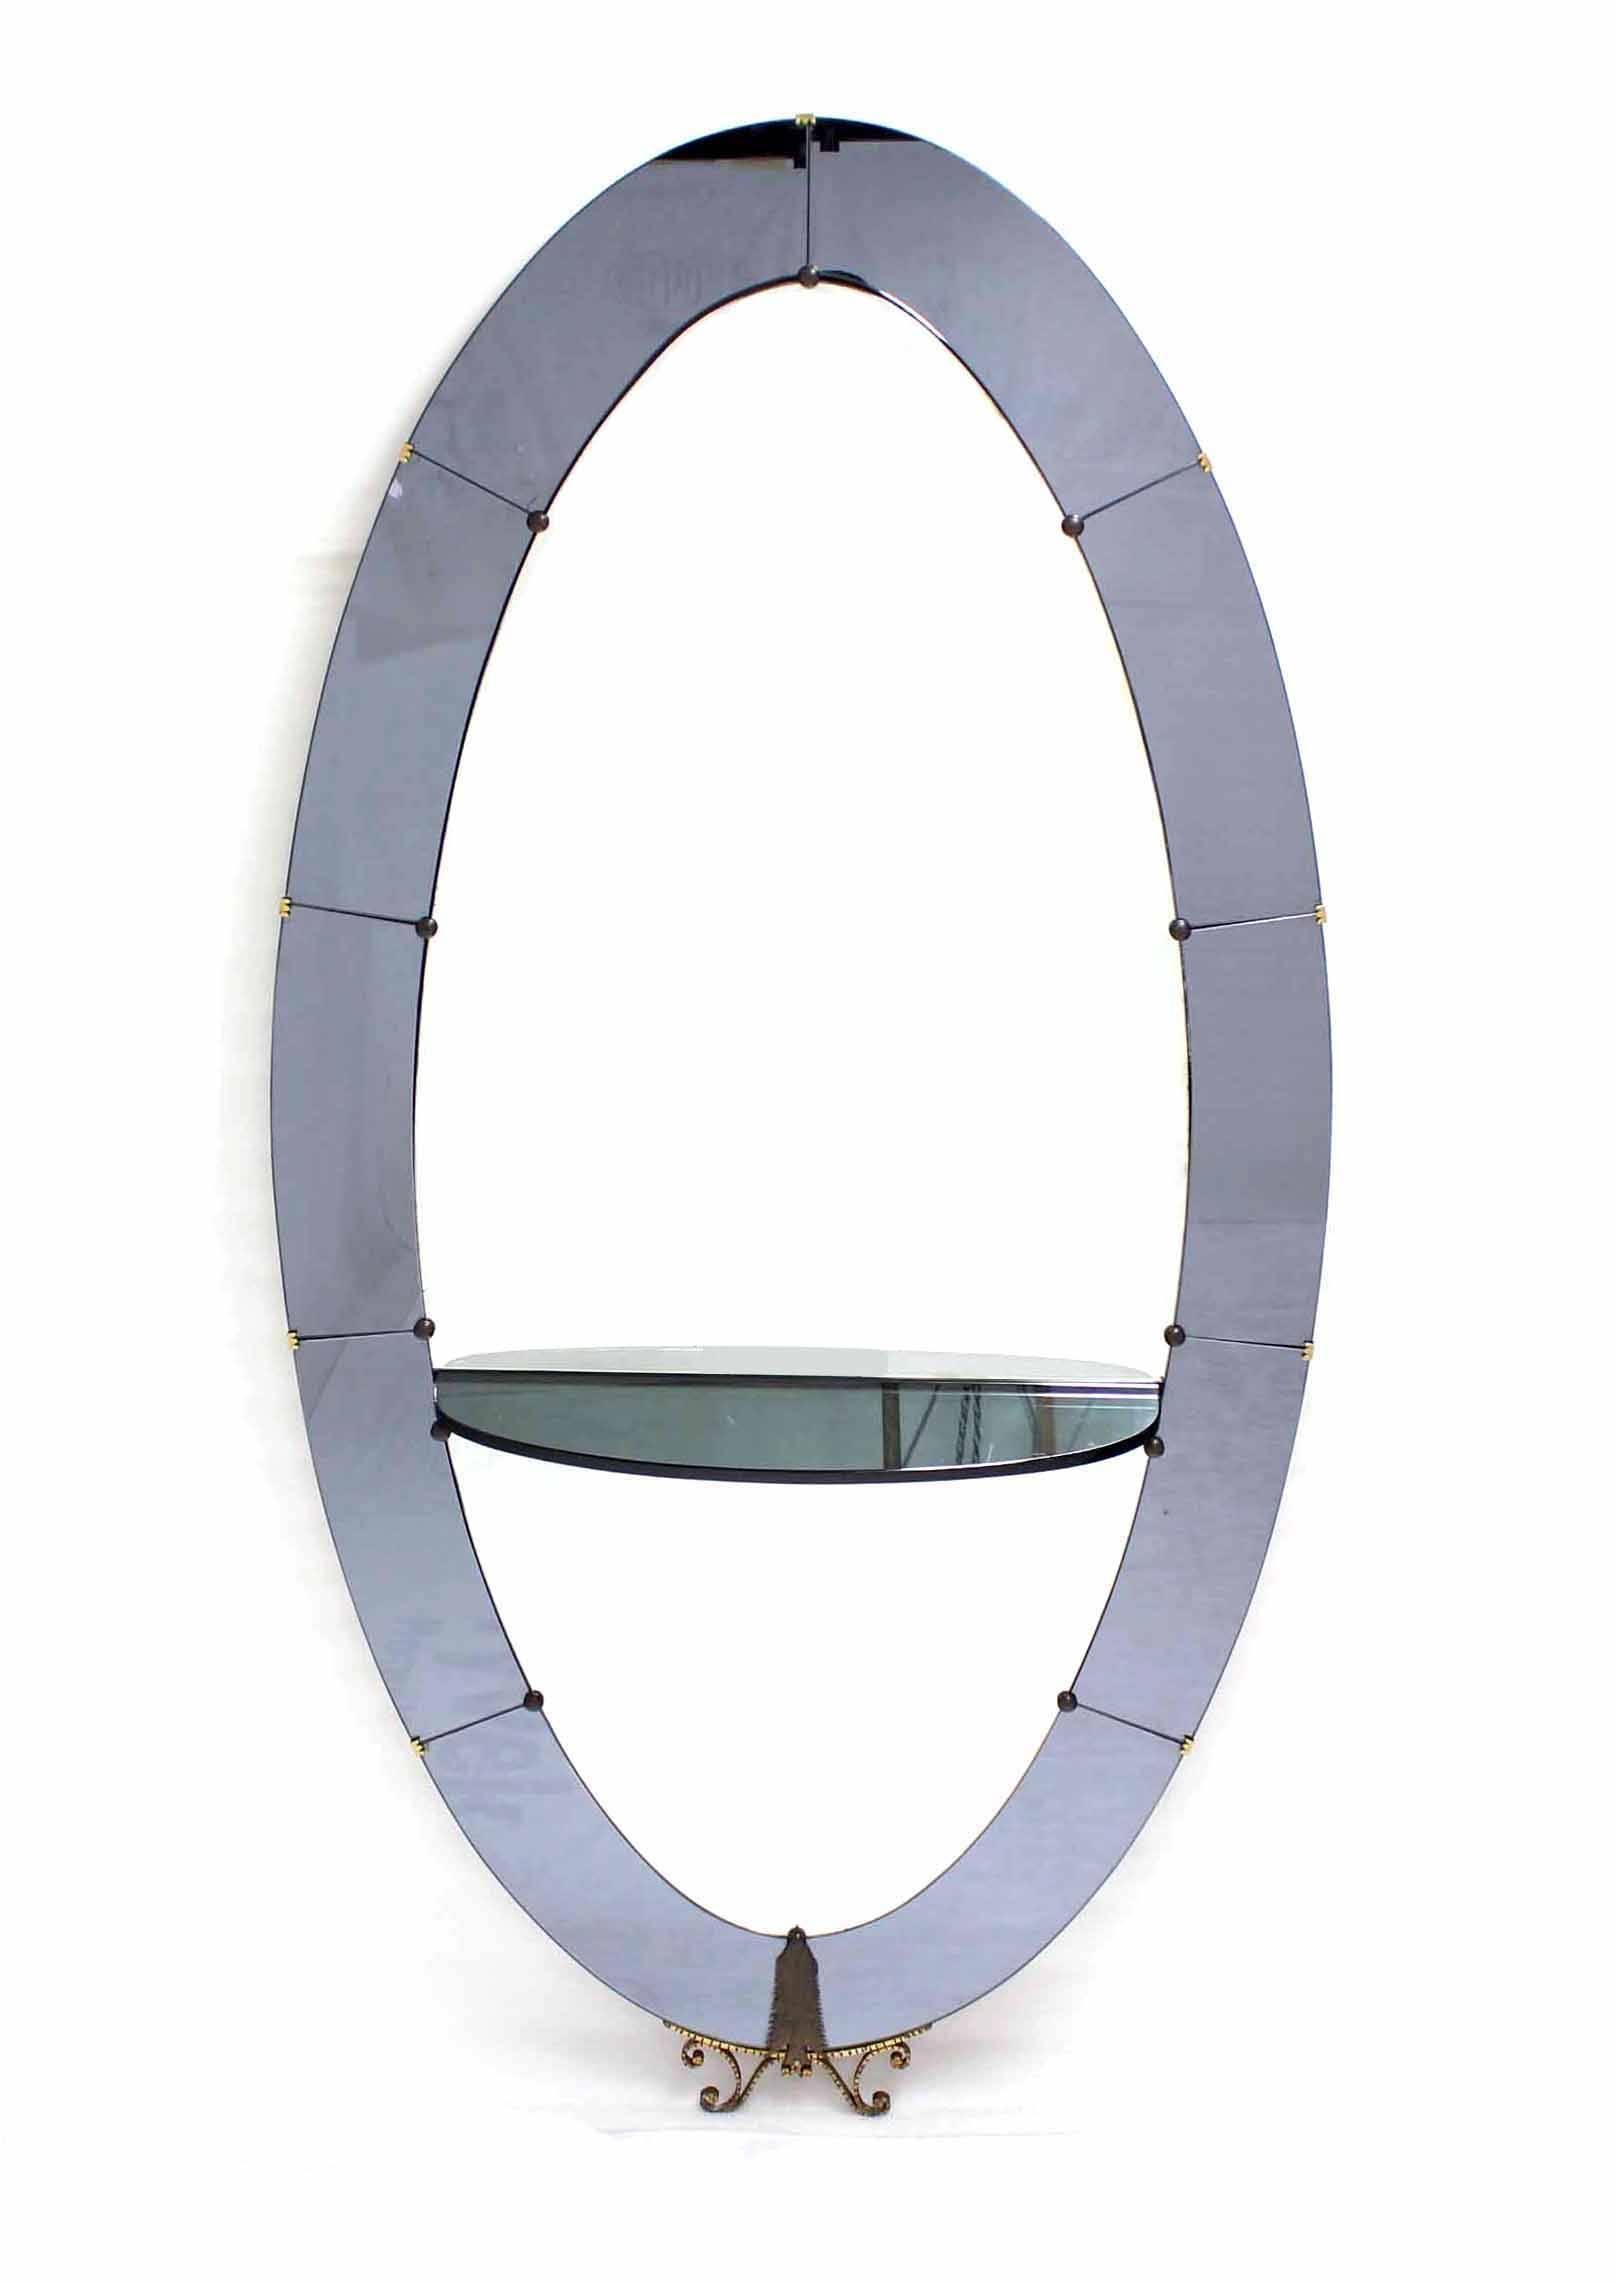 Outstanding two tone cobalt blue and clear oval Art Deco cheval floor mirror with glass shelf perfect vanity alternative. This is a very good quality unique piece. This is a very large and heavy mirror with thick glass shelf. Measures: 7 foot tall.